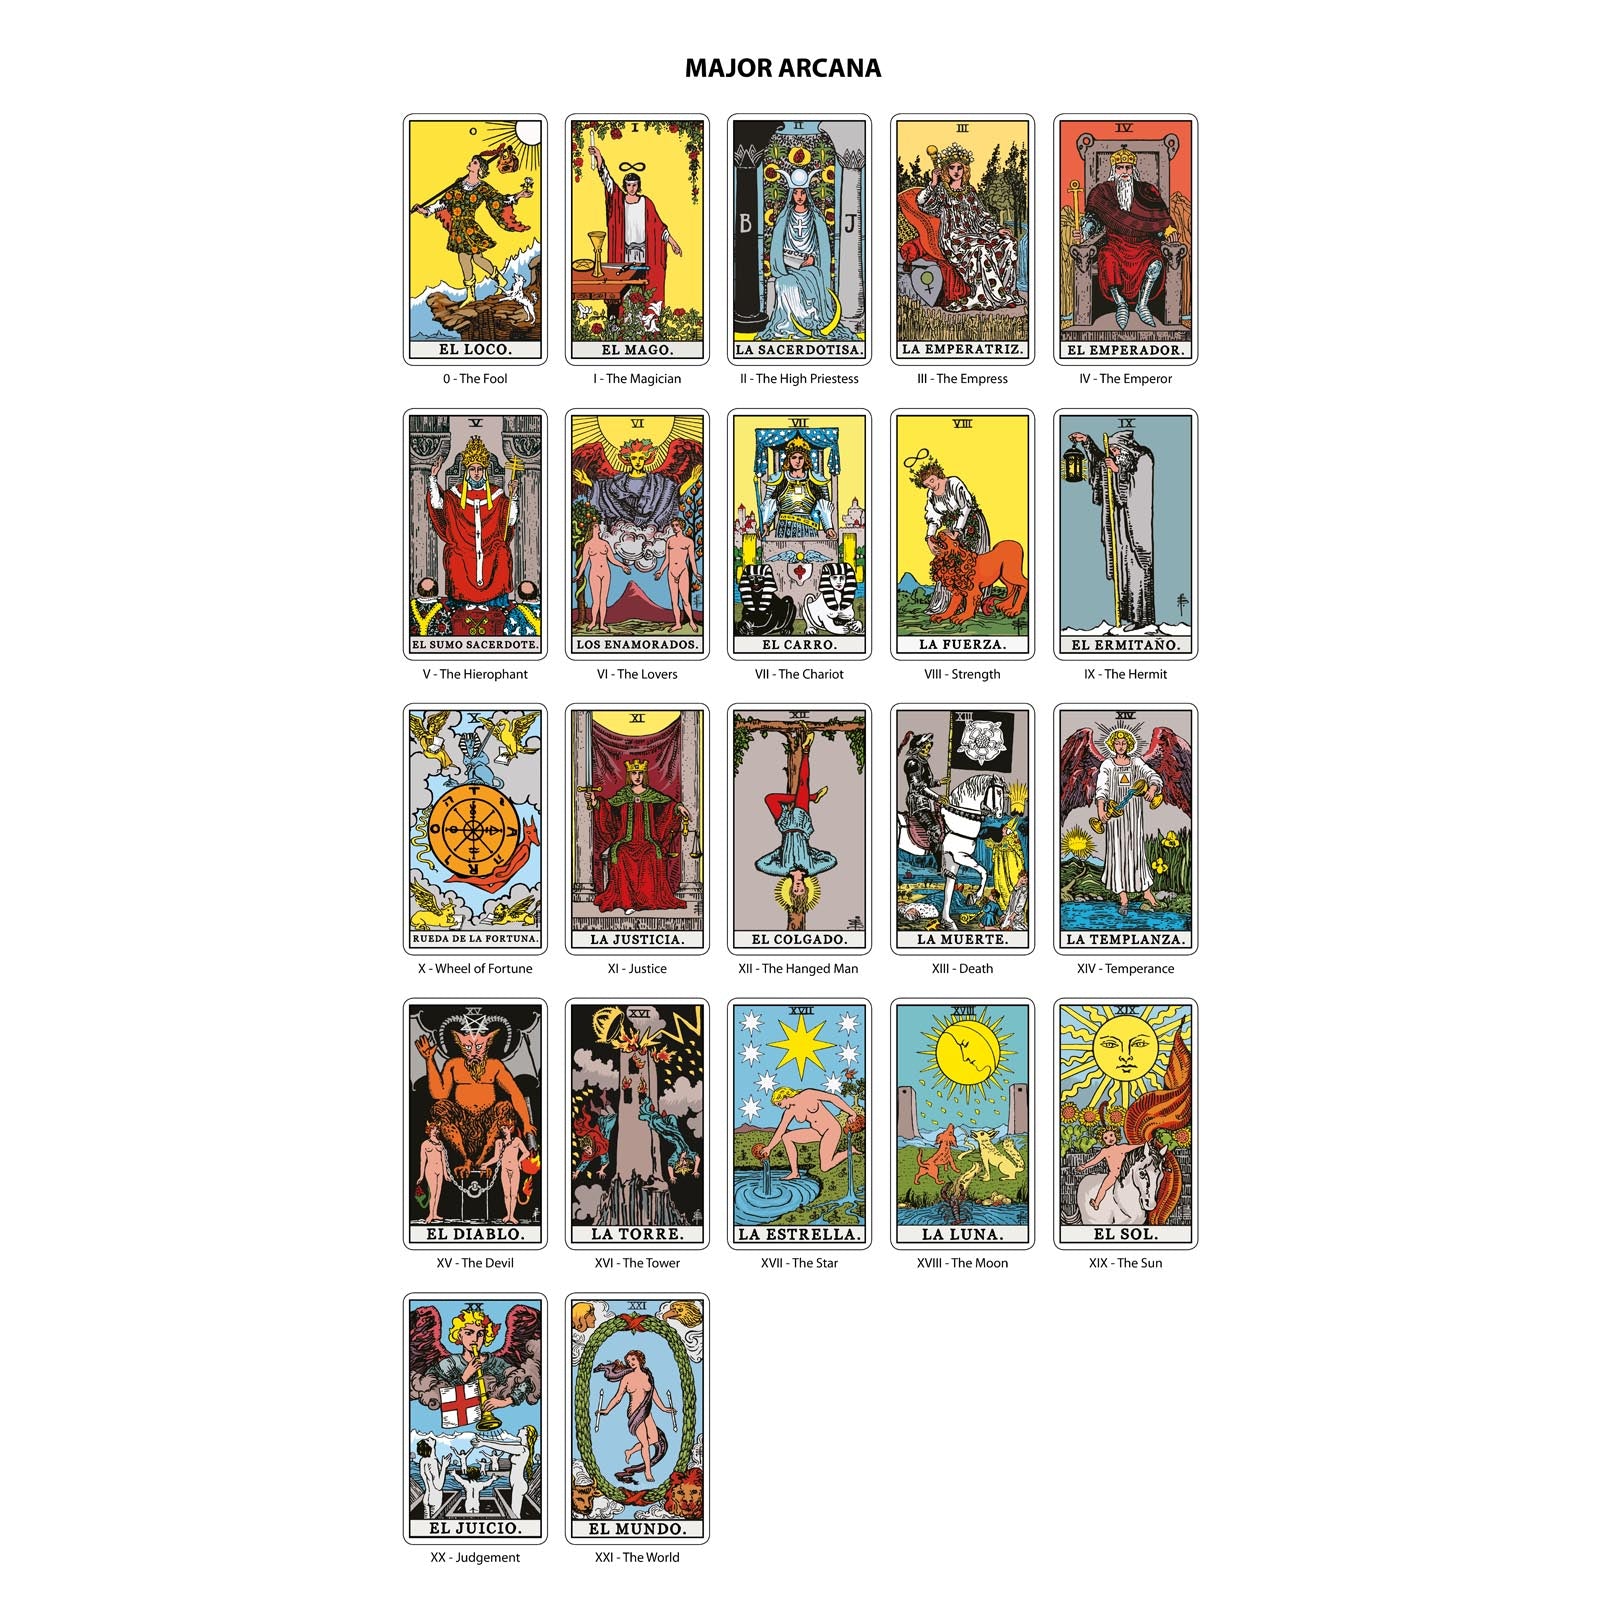 Vintage Spanish Tarot 1978 Tarot Español by Fournier rare Edition Published  in Spain bilingual Edition English and Spanish 